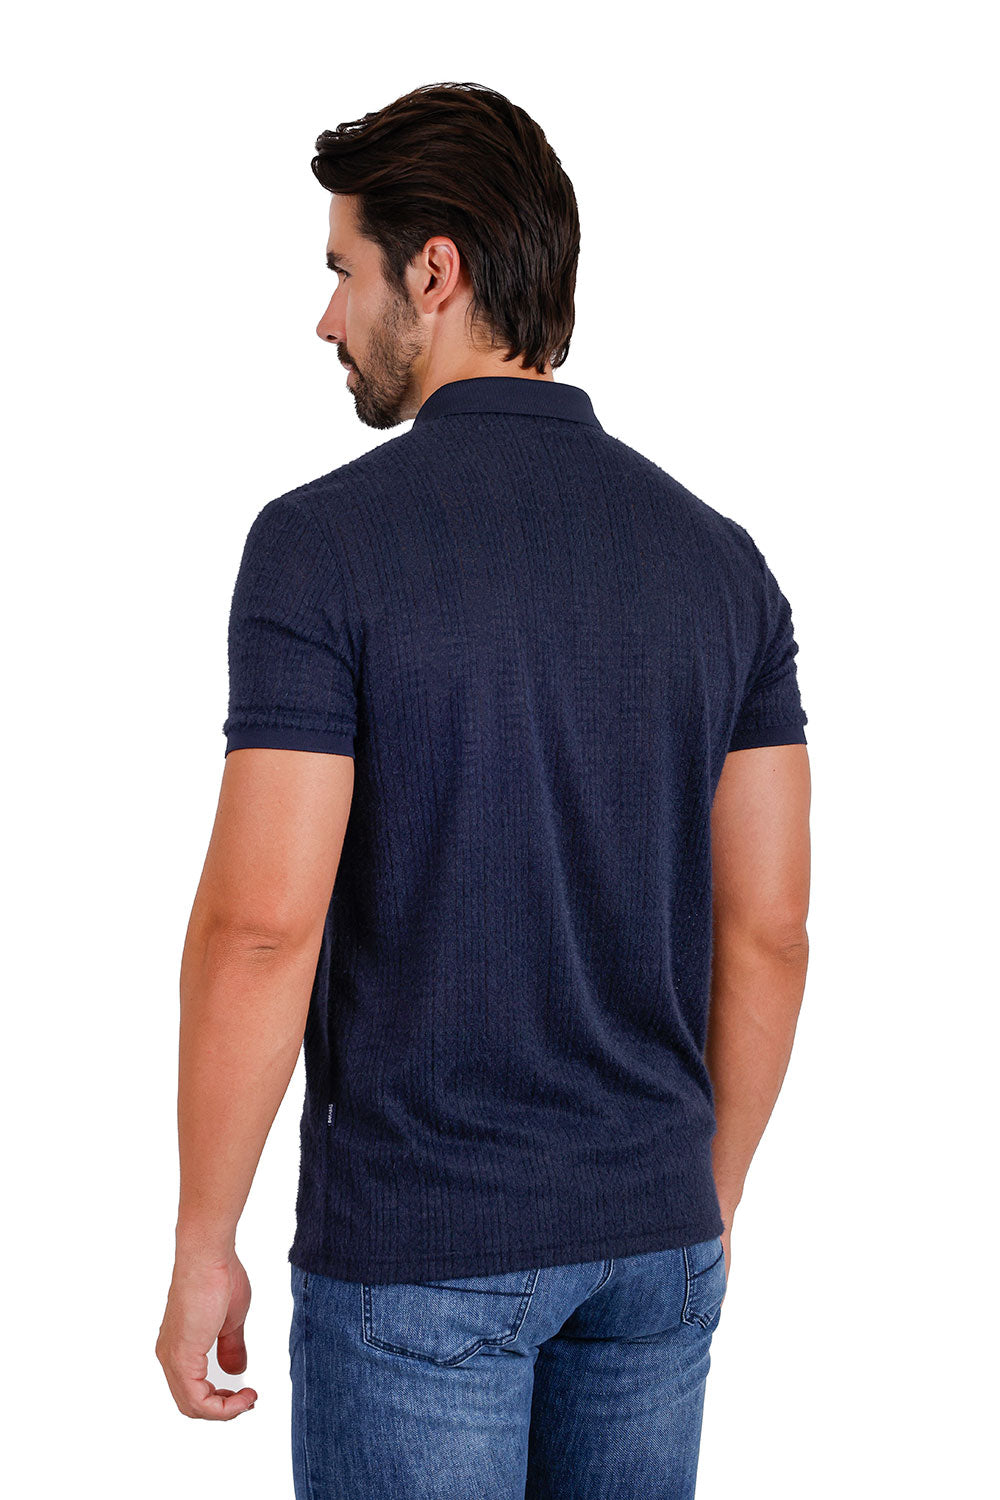 Men's solid color stretch feather feel polo short sleeve shirt 3P03 Navy